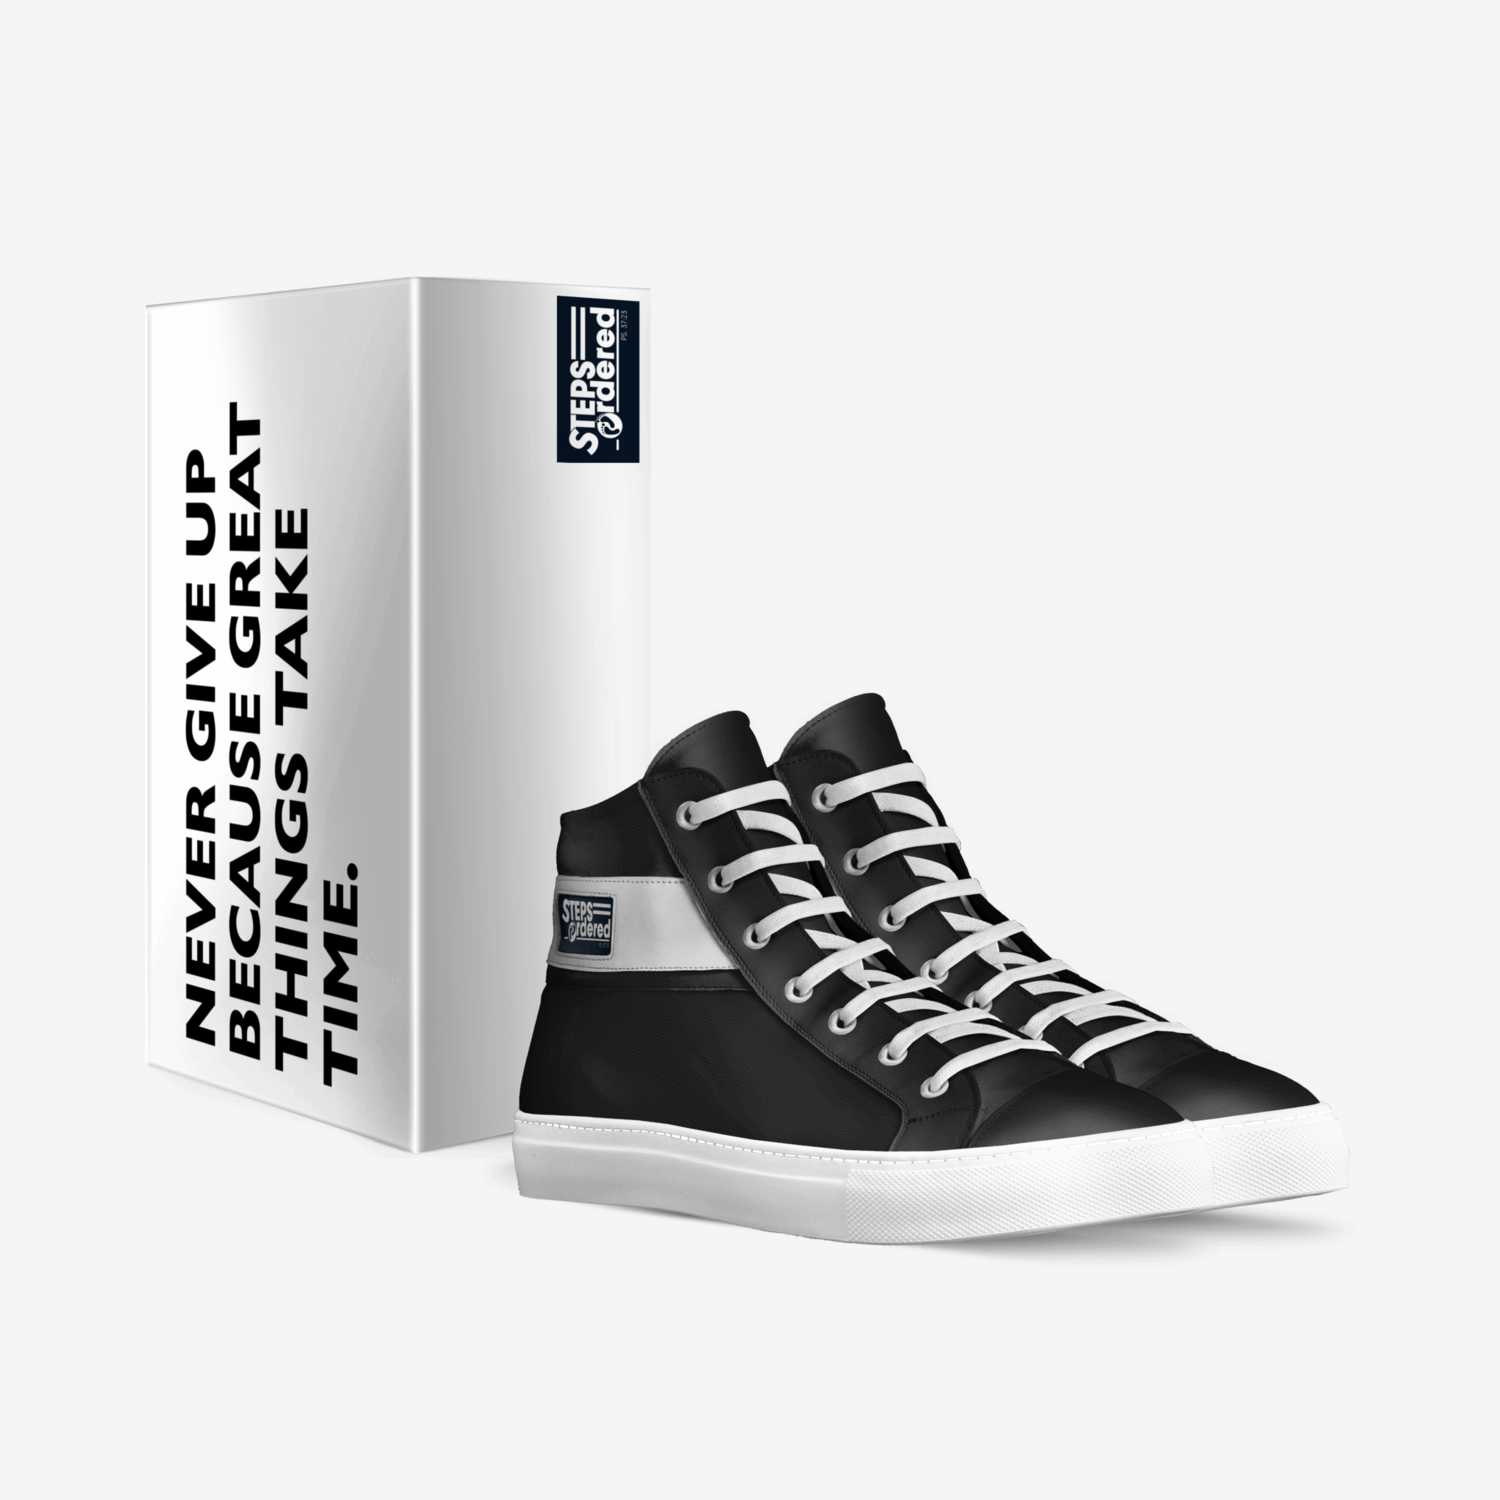 Steps Ordered-K1 custom made in Italy shoes by Barry Henson | Box view